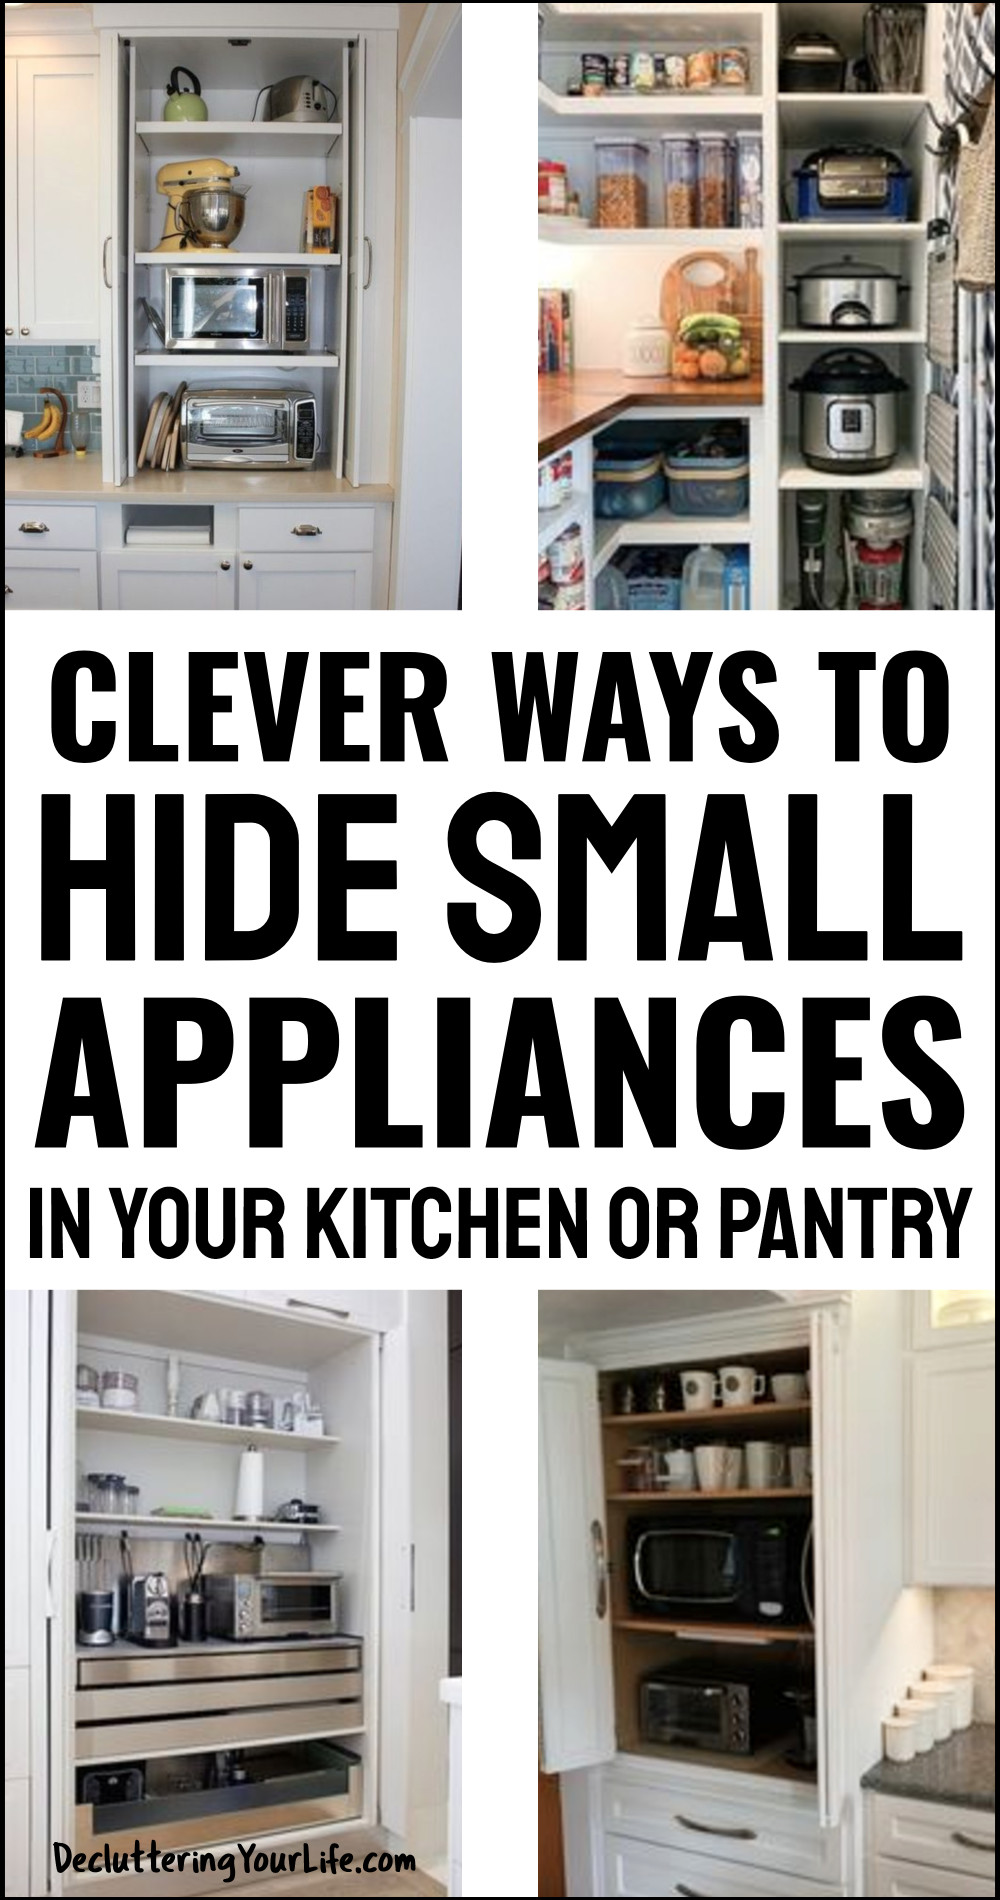 How to hide small appliances in your kitchen or pantry